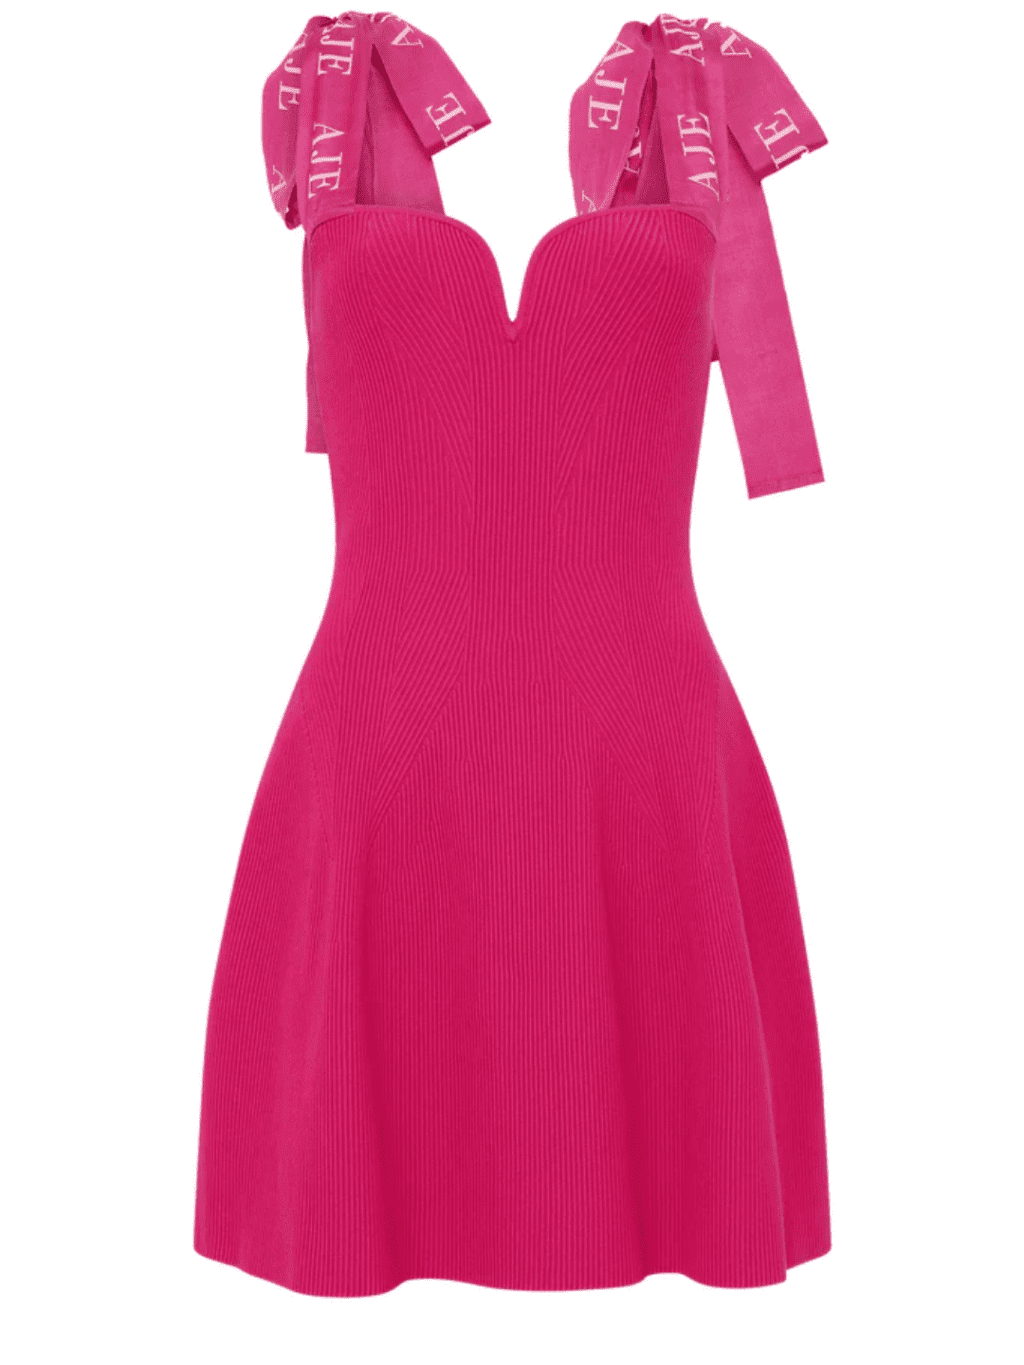 Aje Amber Knit Mini Dress in hot pink for rent.